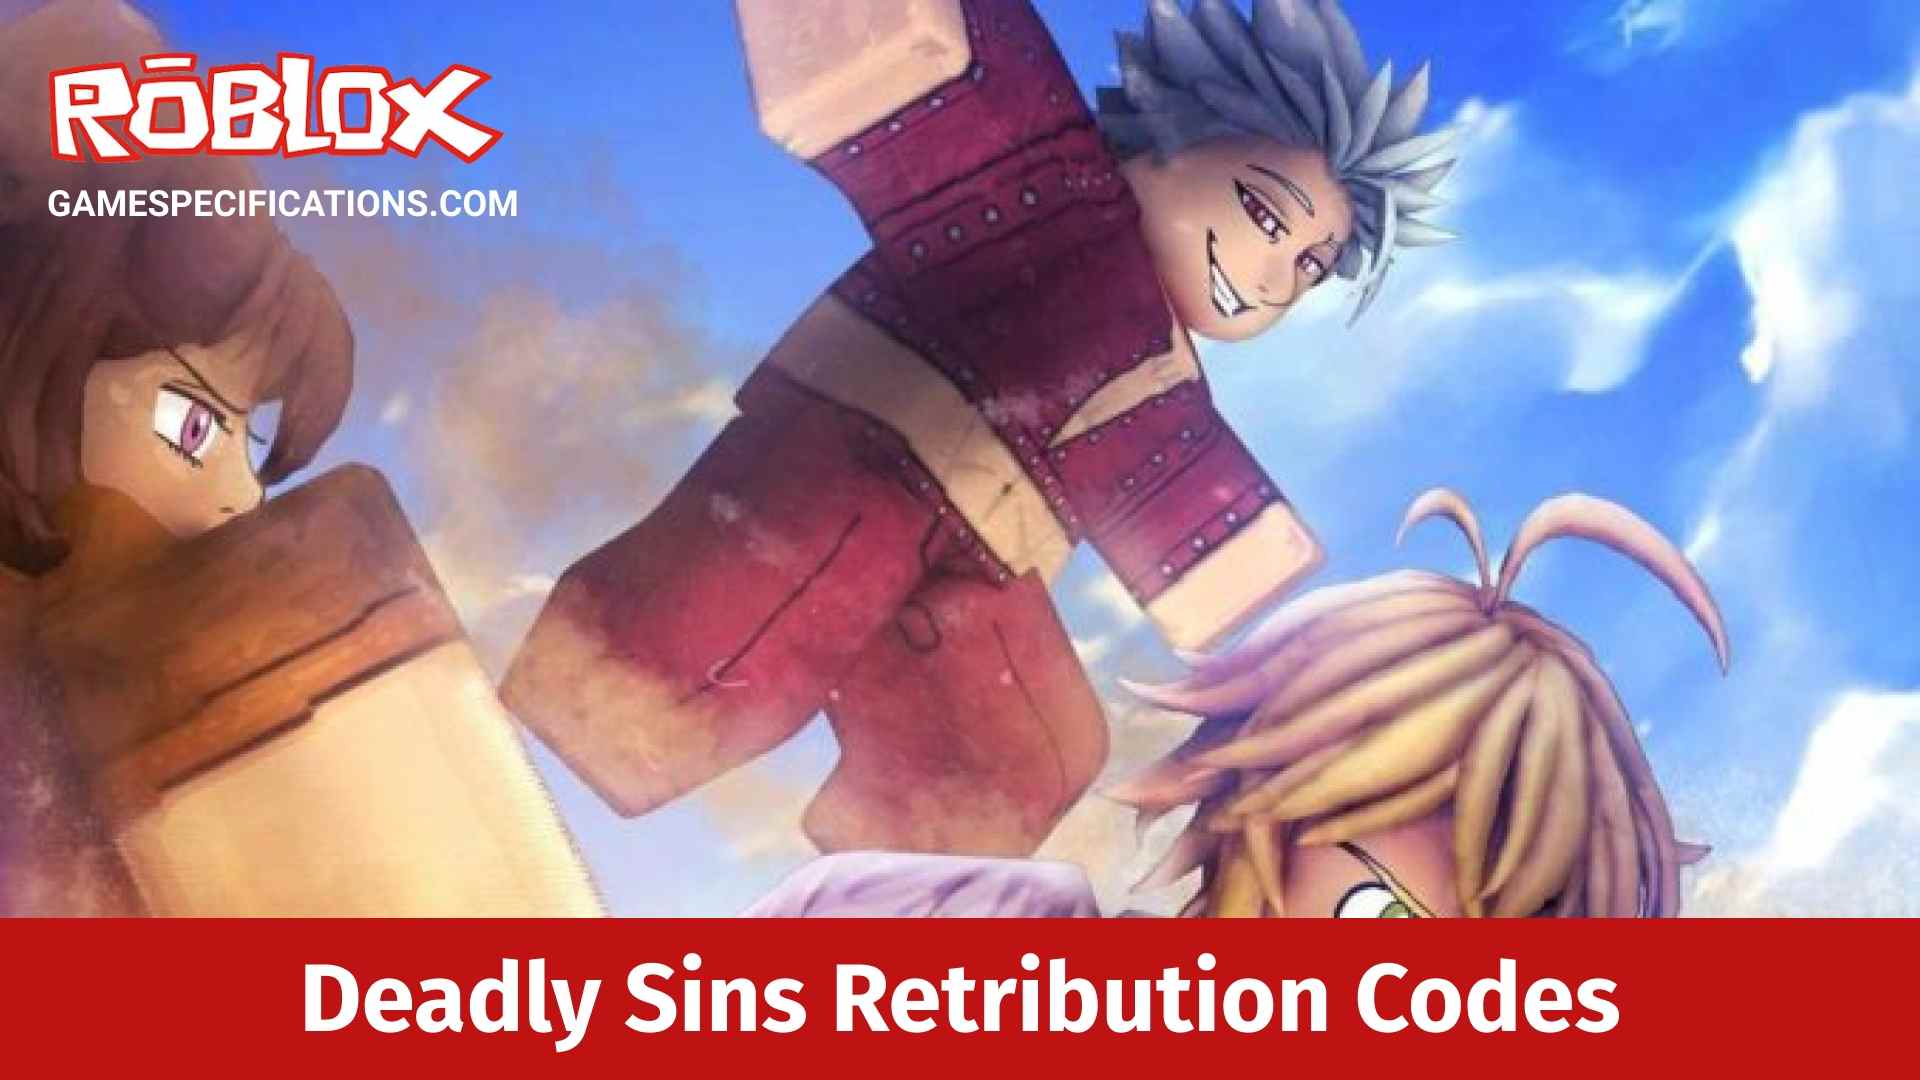 Roblox Deadly Sins Retribution Codes July 2021 Game Specifications - all twiter codes in roblox mad city 25 codes